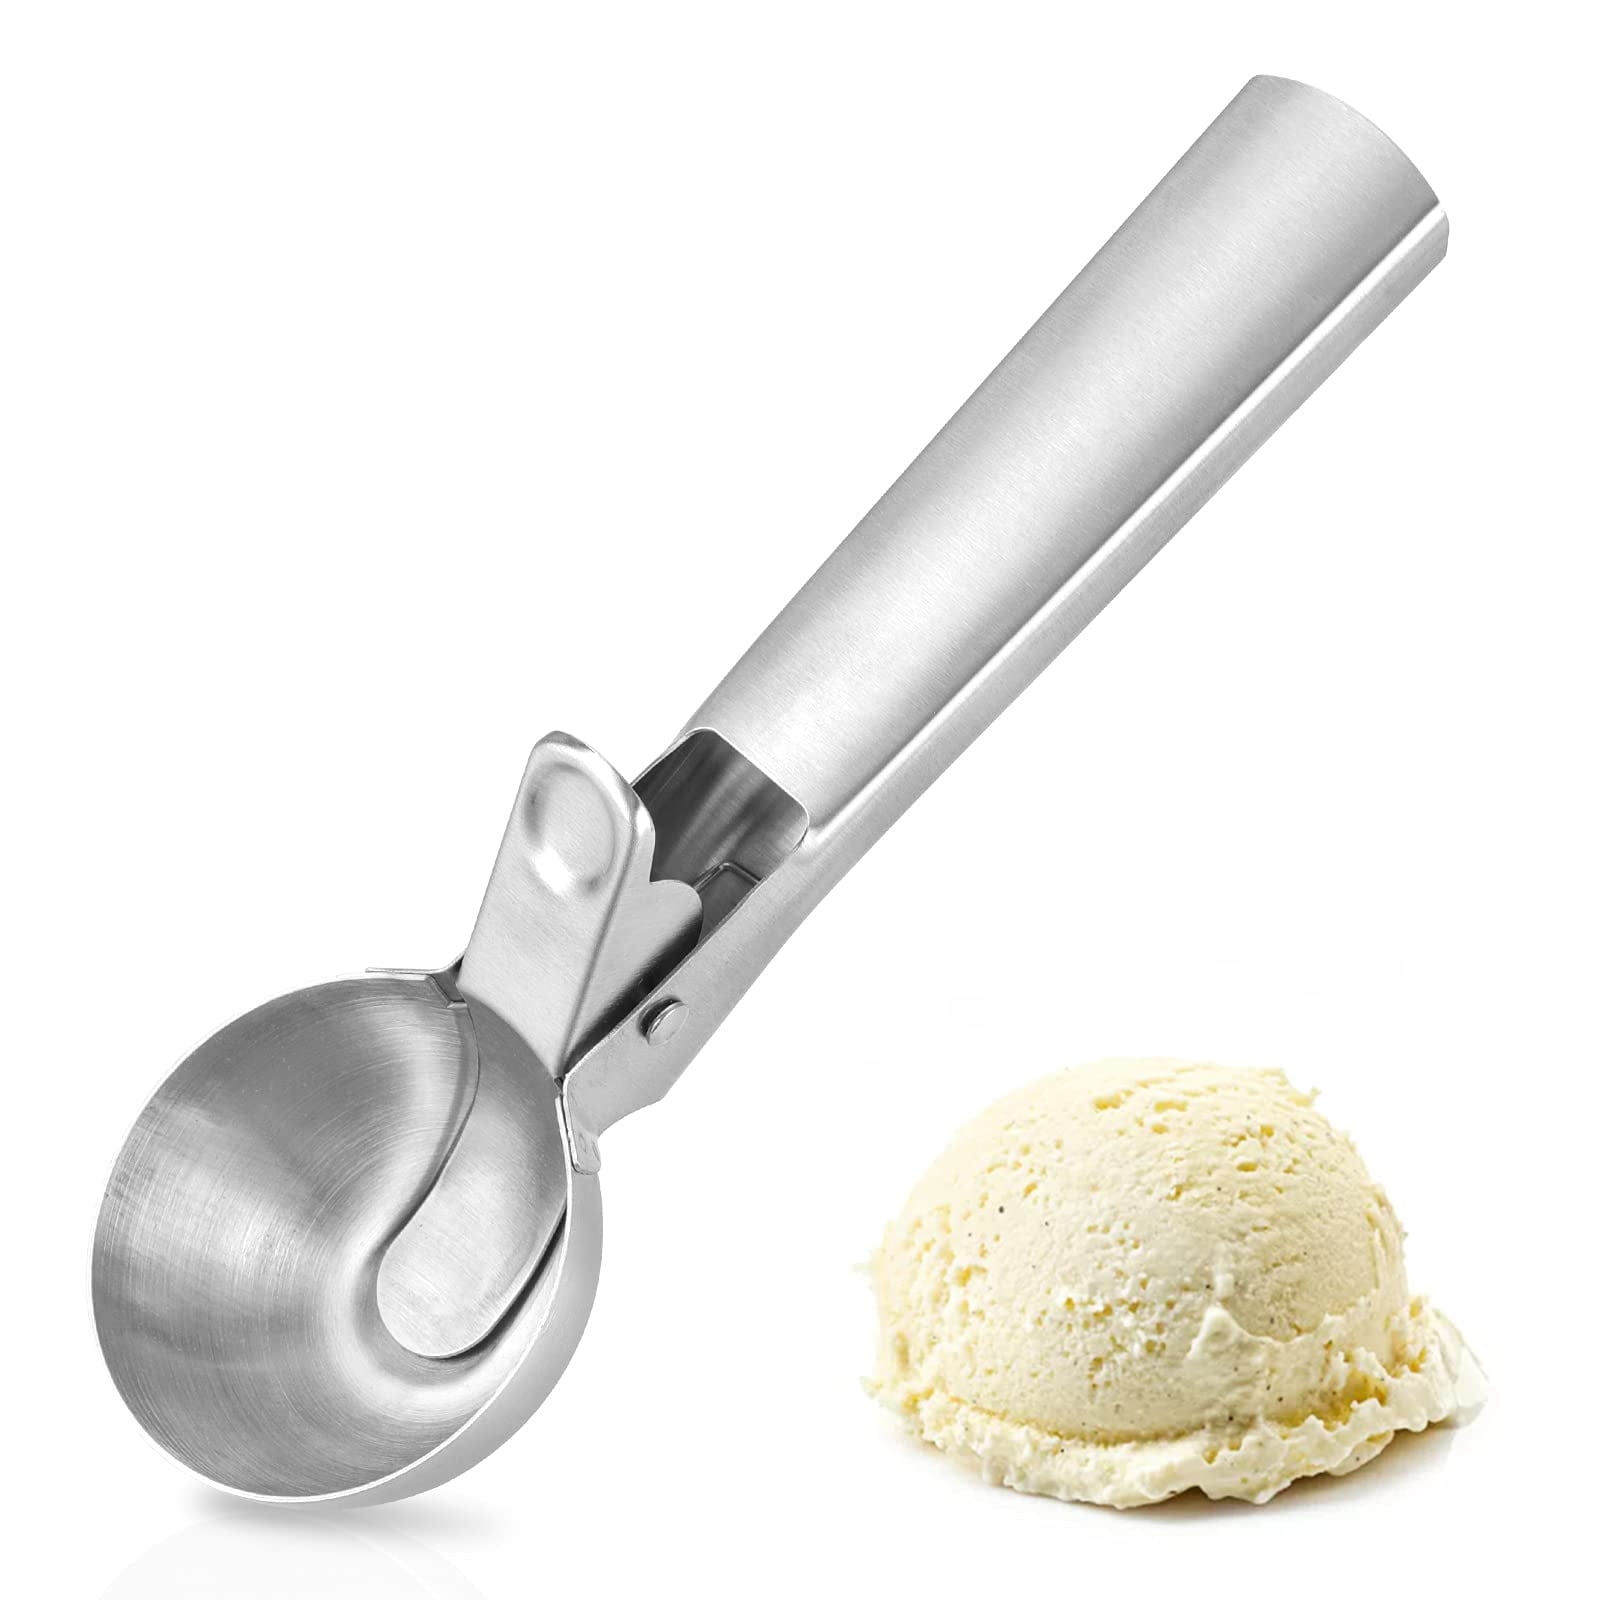 Solid Stainless Steel Ice Cream Scoop with Non Slip Rubber Comfort Grip Handle: Perfect for Ice Cream Shops, Restaurants, and Food Trucks - Dishwasher